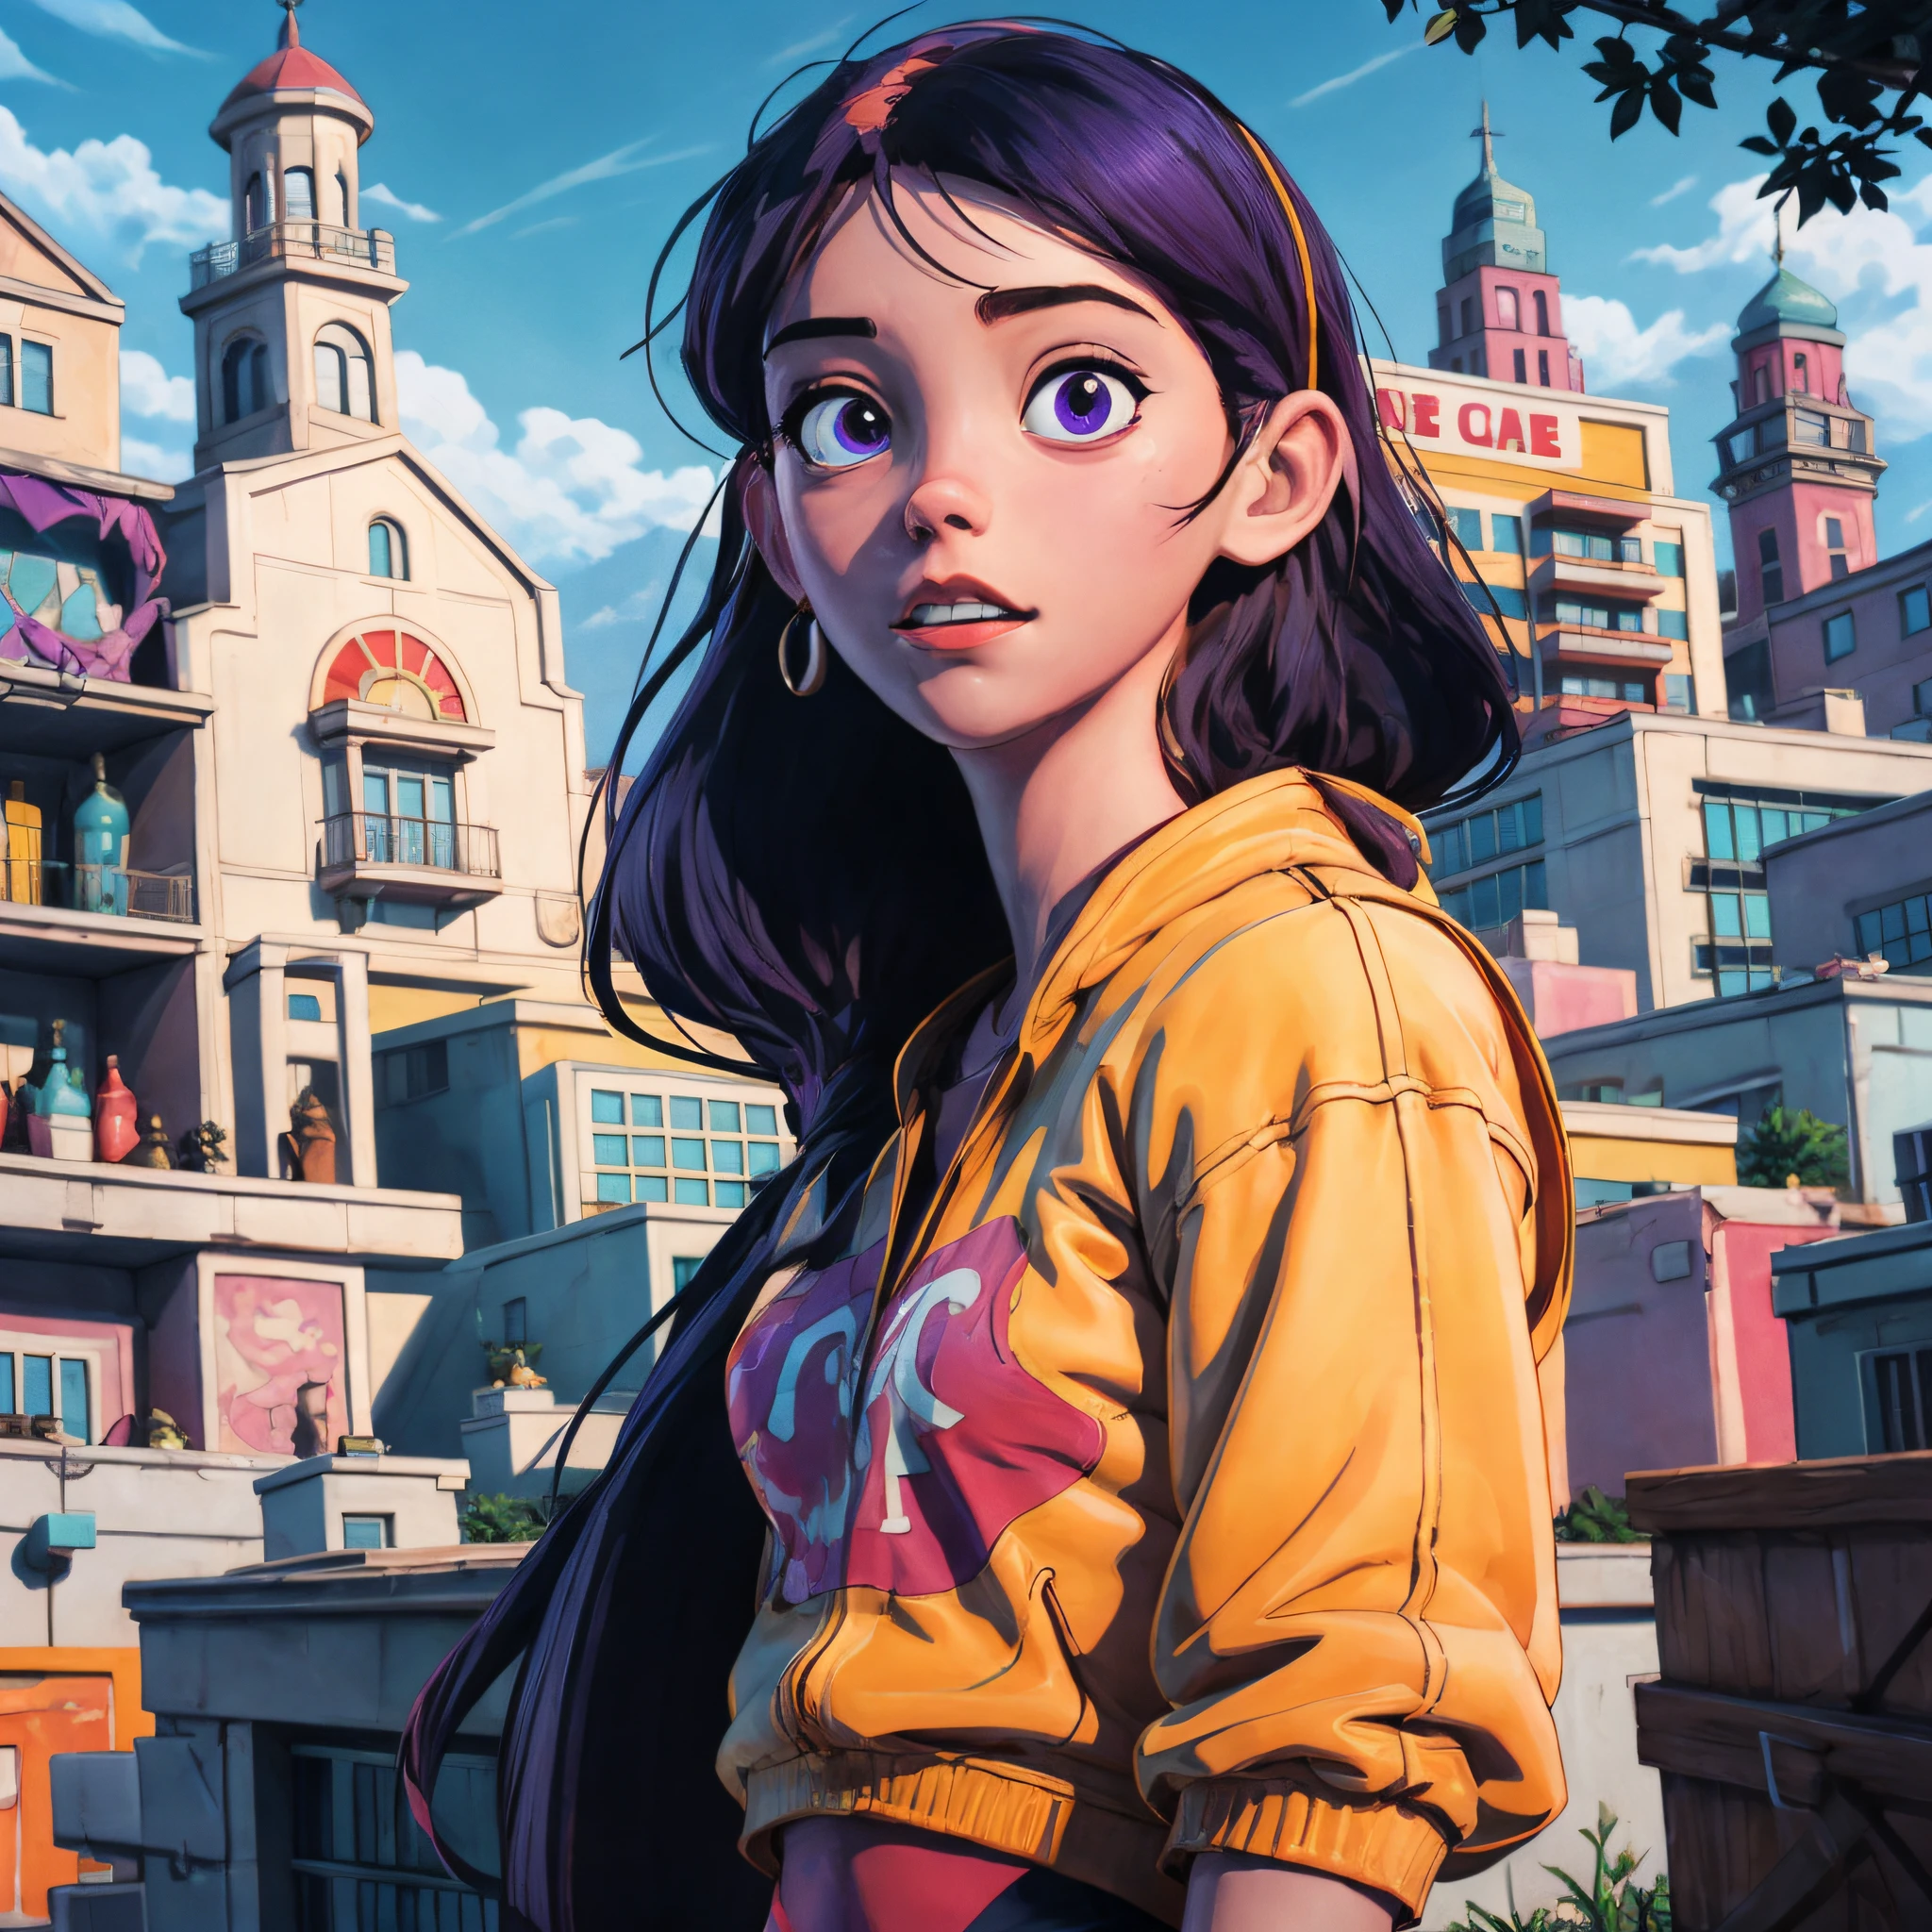 Anime girl with purple hair and a yellow jacket in front of a building, low detailed. digitalpainting, fanart  urbana, digitalpainting altamente detalhada, digitalpainting detalhada, stylized urban fantasy artwork, digitalpainting altamente detalhada, realistic anime 3d style, high detailed official artwork, digitalpainting dos desenhos animados, detailed digital art in 4k, Digital anime illustration, Violet Parr,violet-parr